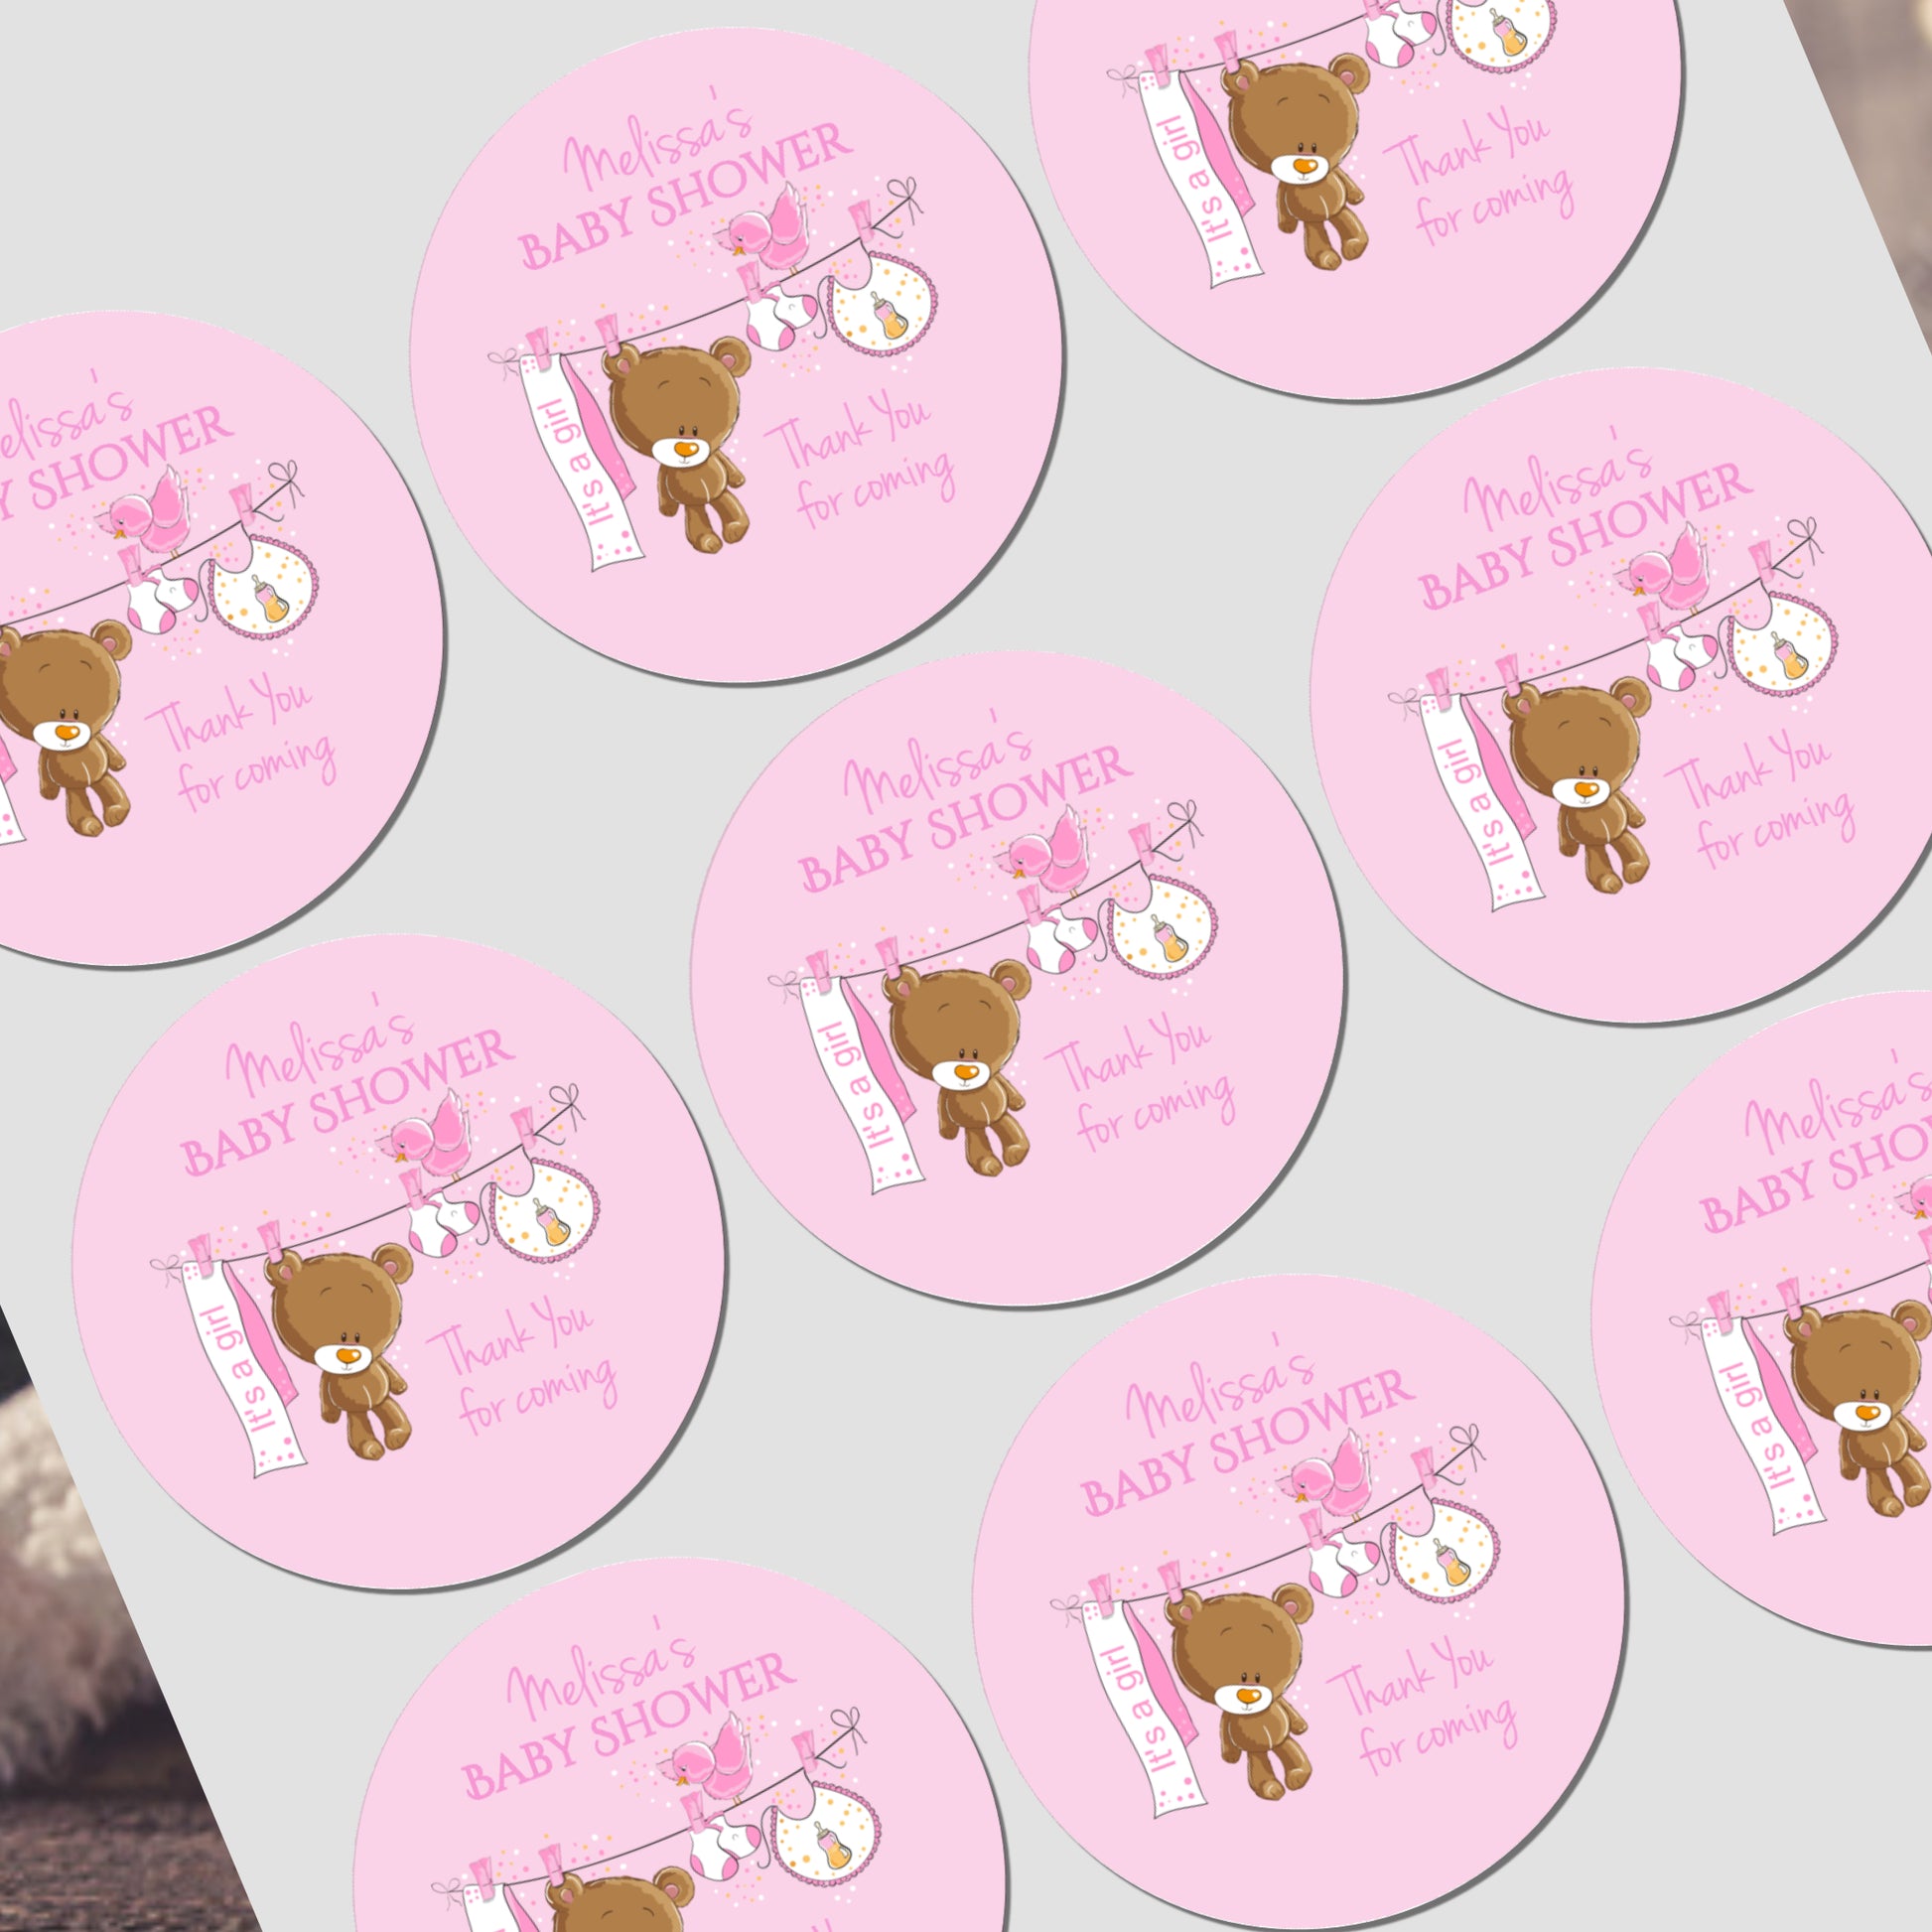 baby shower stickers with a teddy bear on them